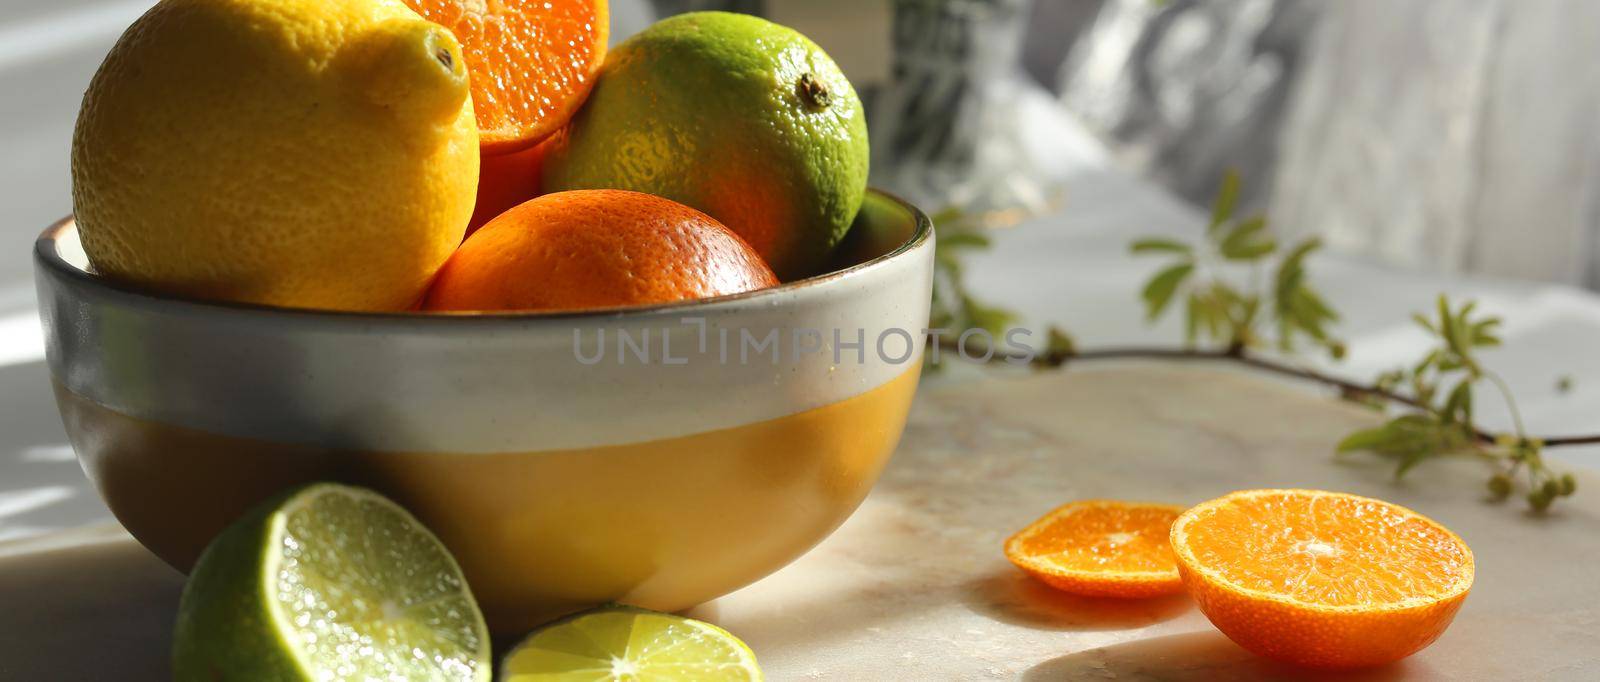 rustic kitchen with citrus fruits. Lime, orange mint lemon in kitchen ball on white table